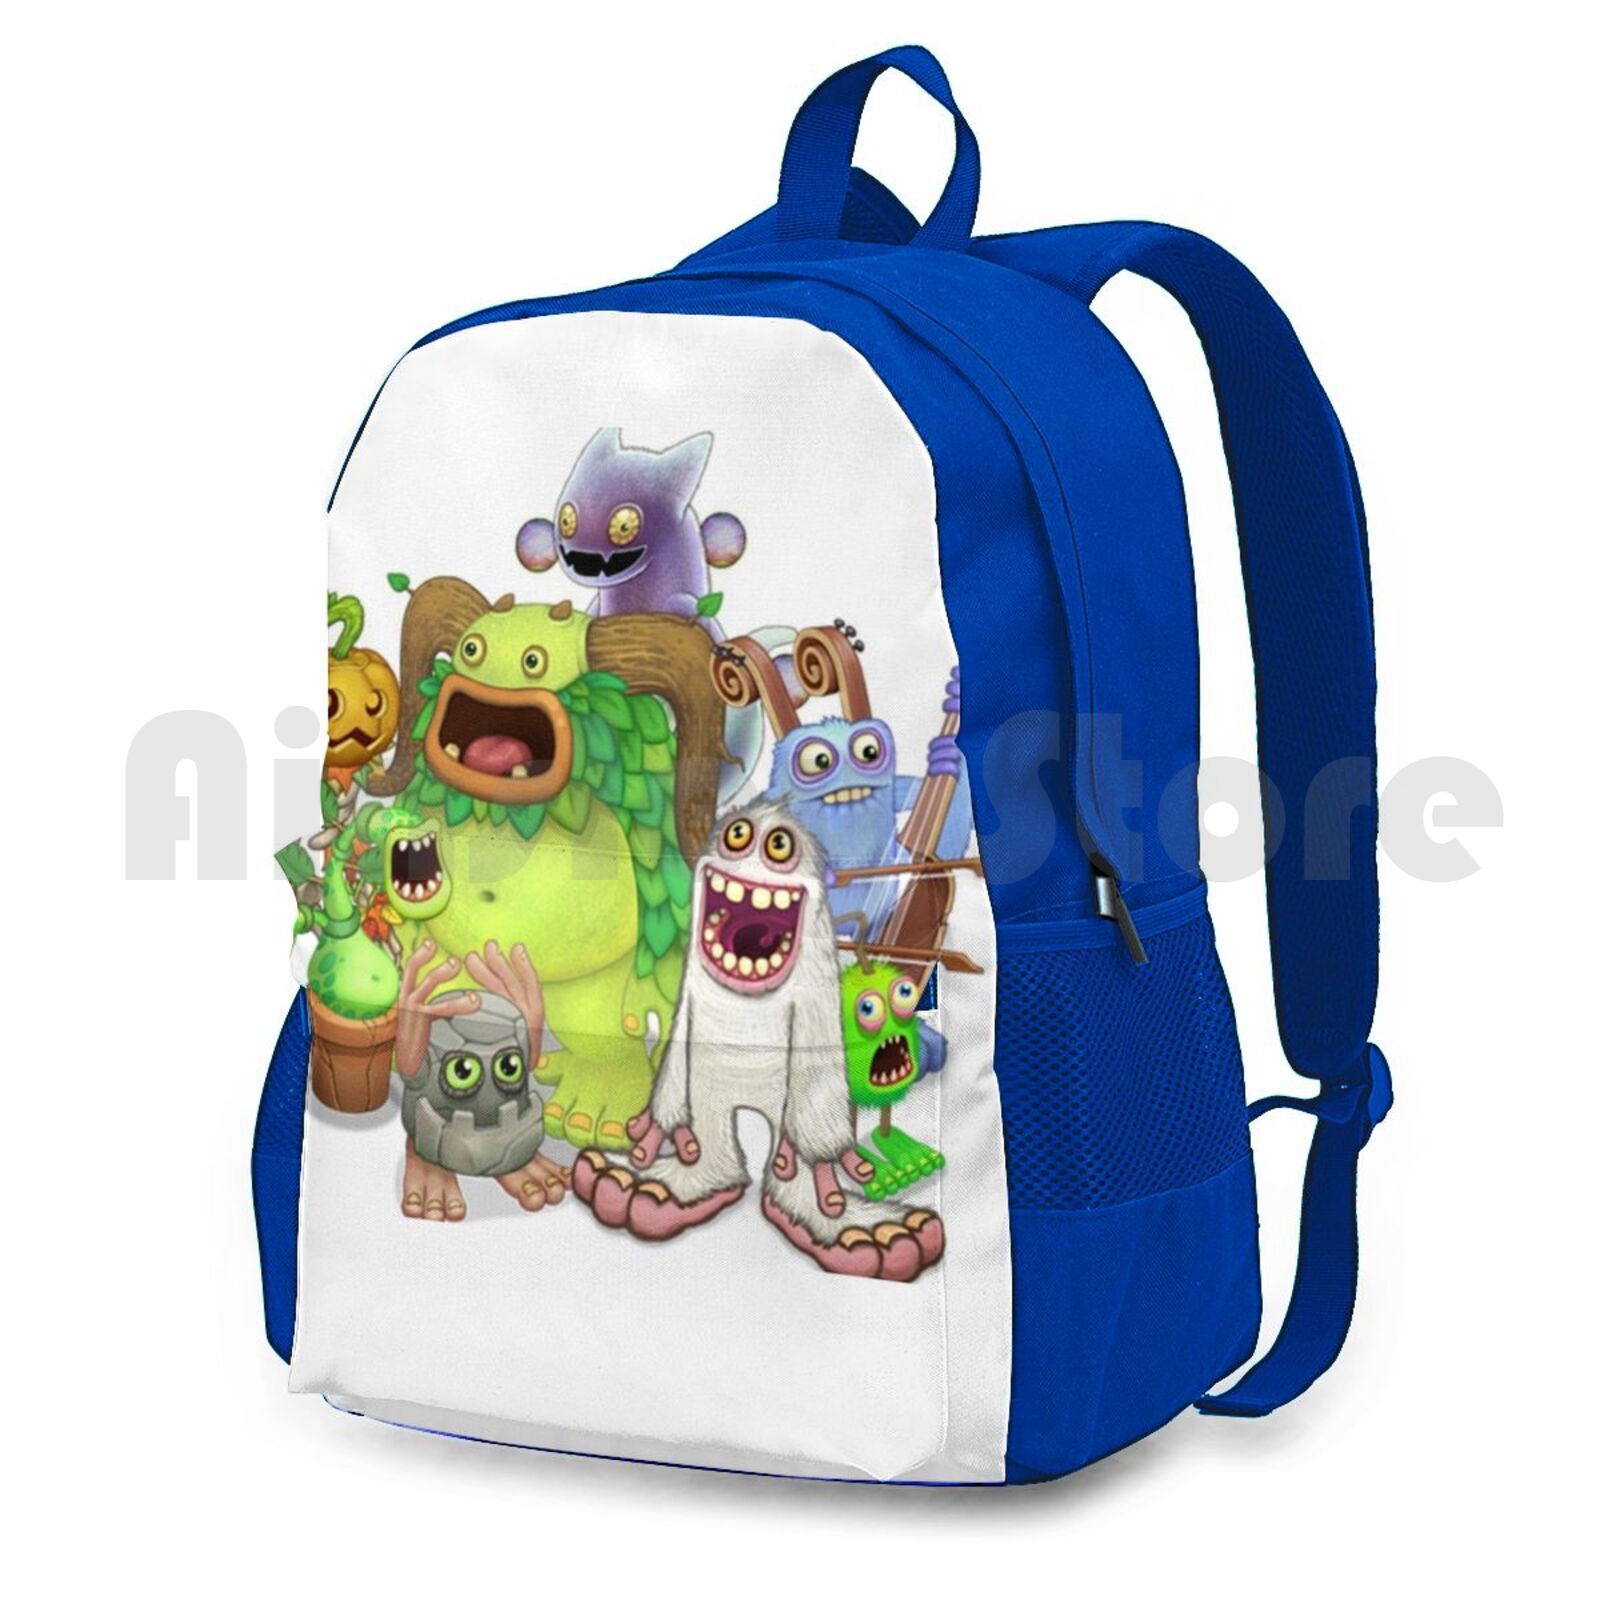 My Singing Monsters Characters Outdoor Hiking Backpack Riding Climbing Sports Bag My Singing Monsters My Singing 1 - My Singing Monsters Plush